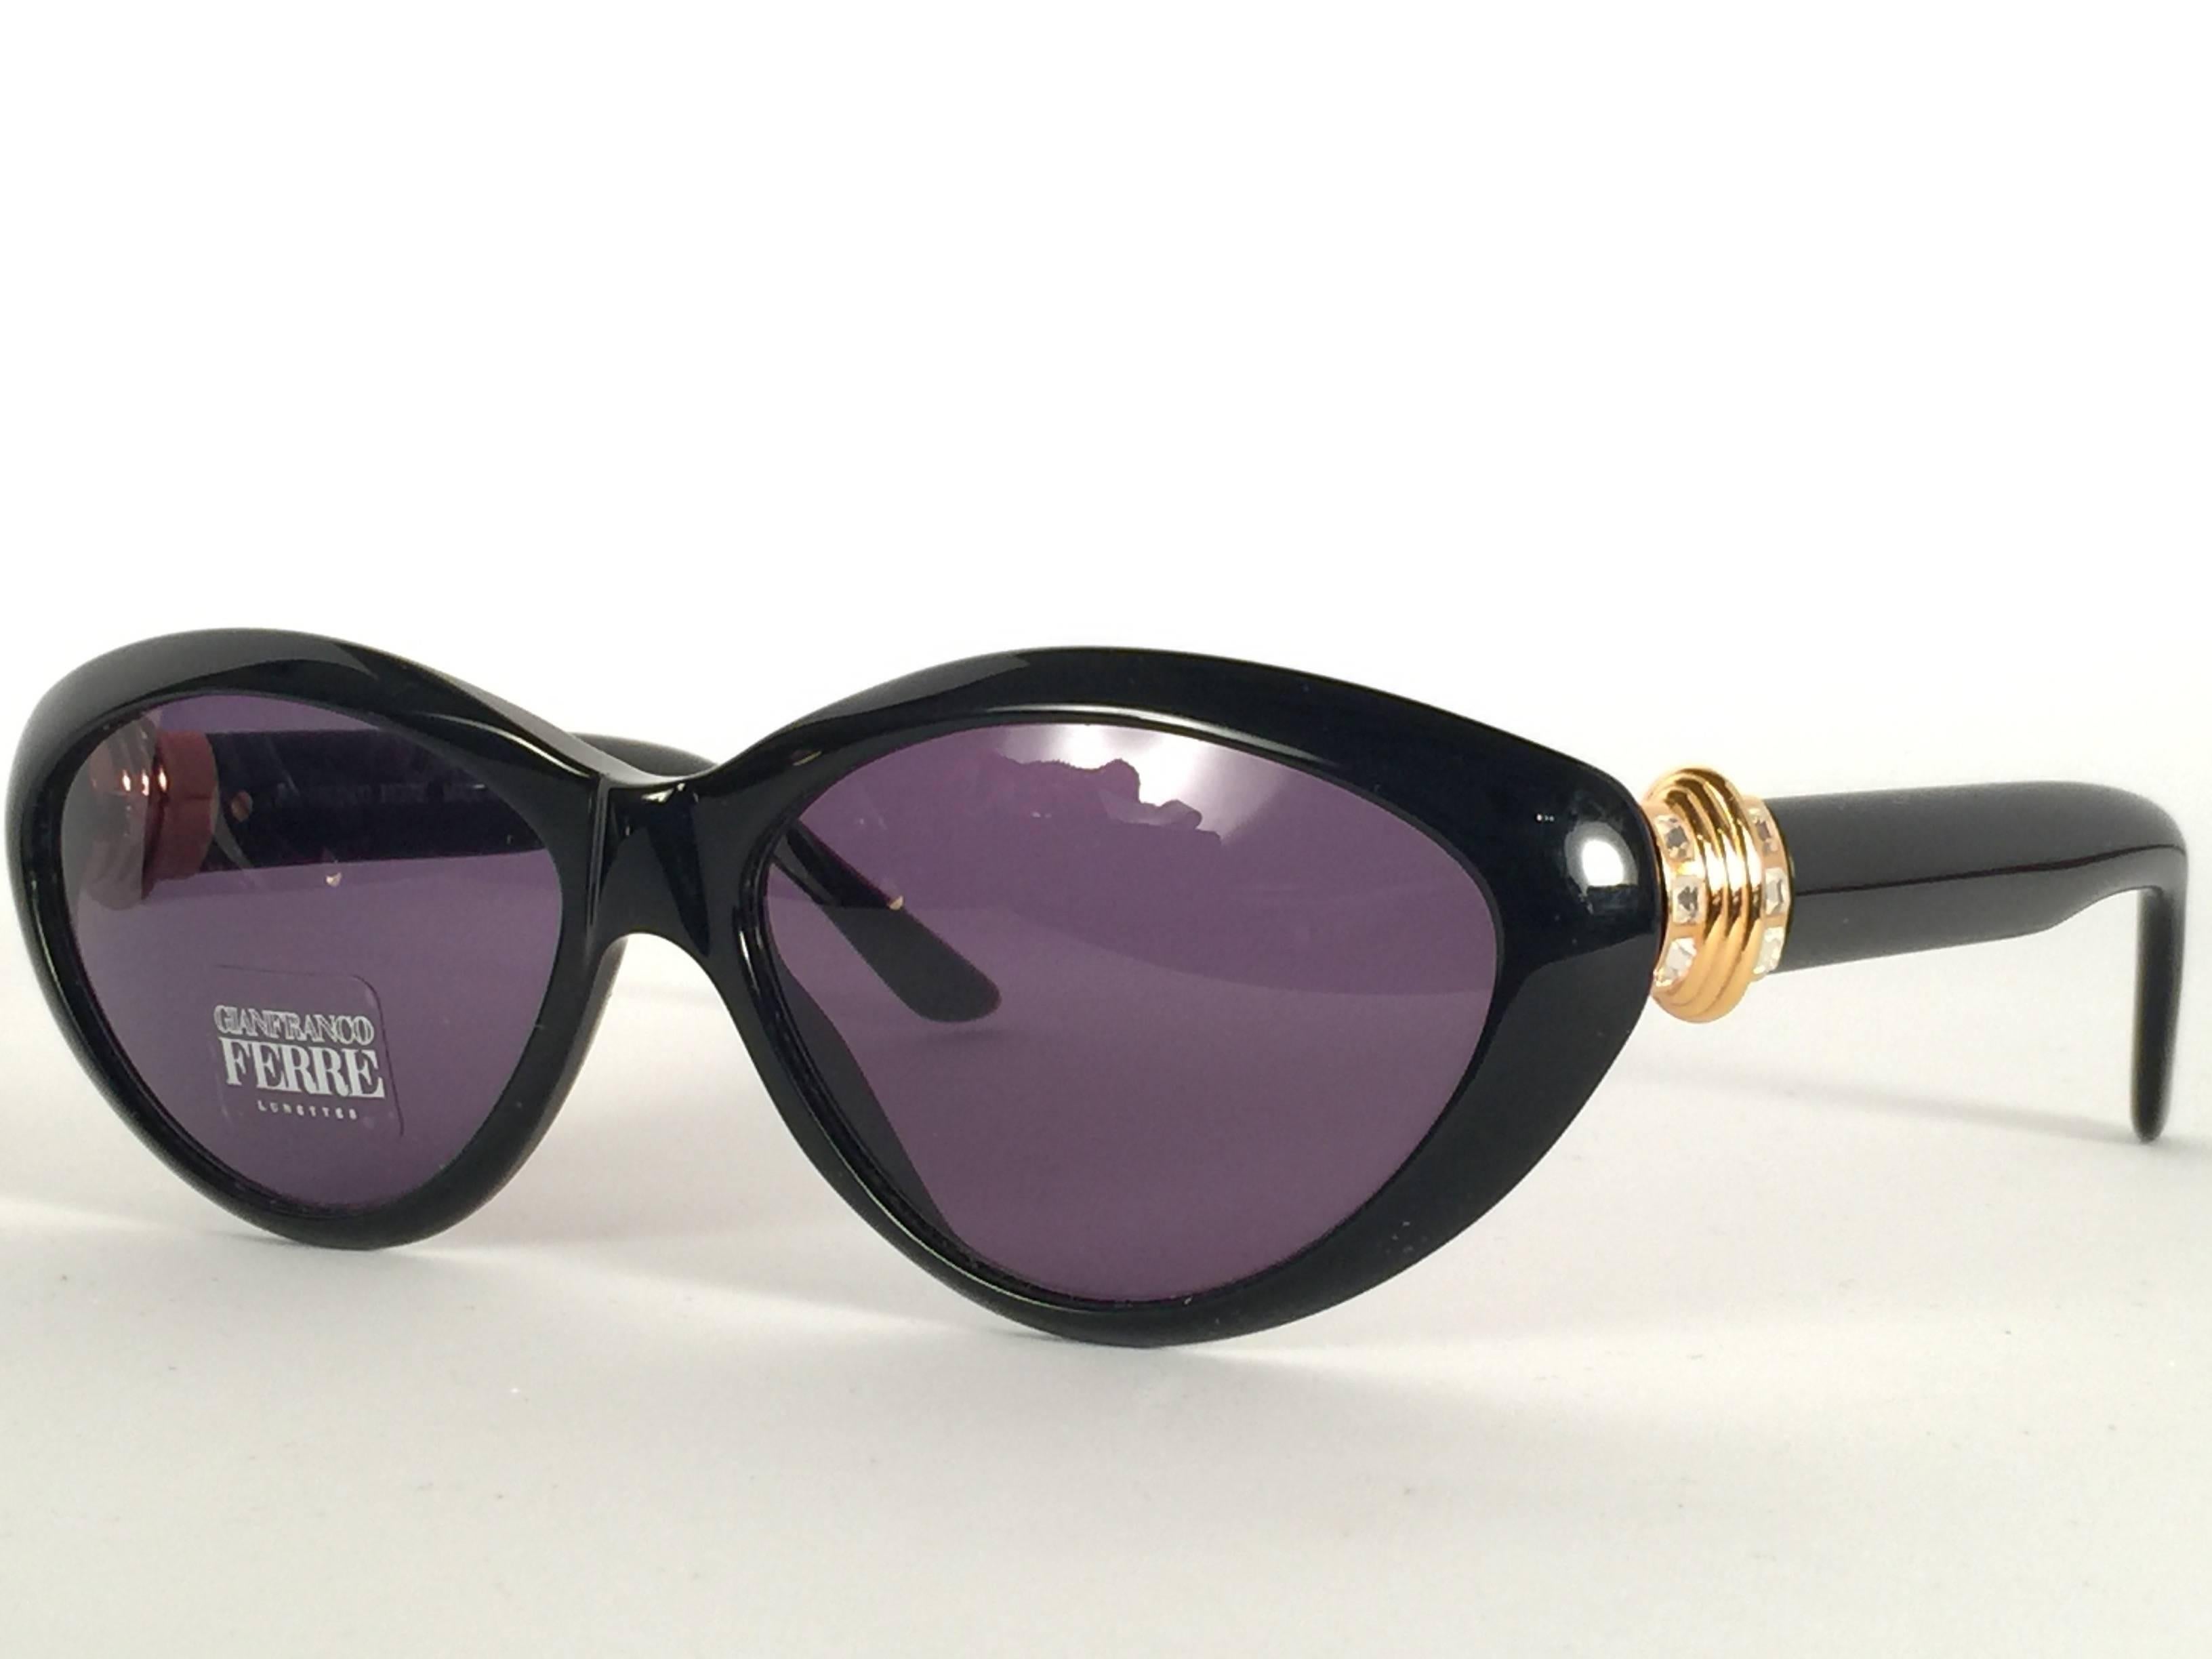 New Vintage Gianfranco Ferré Black & Rhinestones 1990's Made in Italy Sunglasses For Sale 1